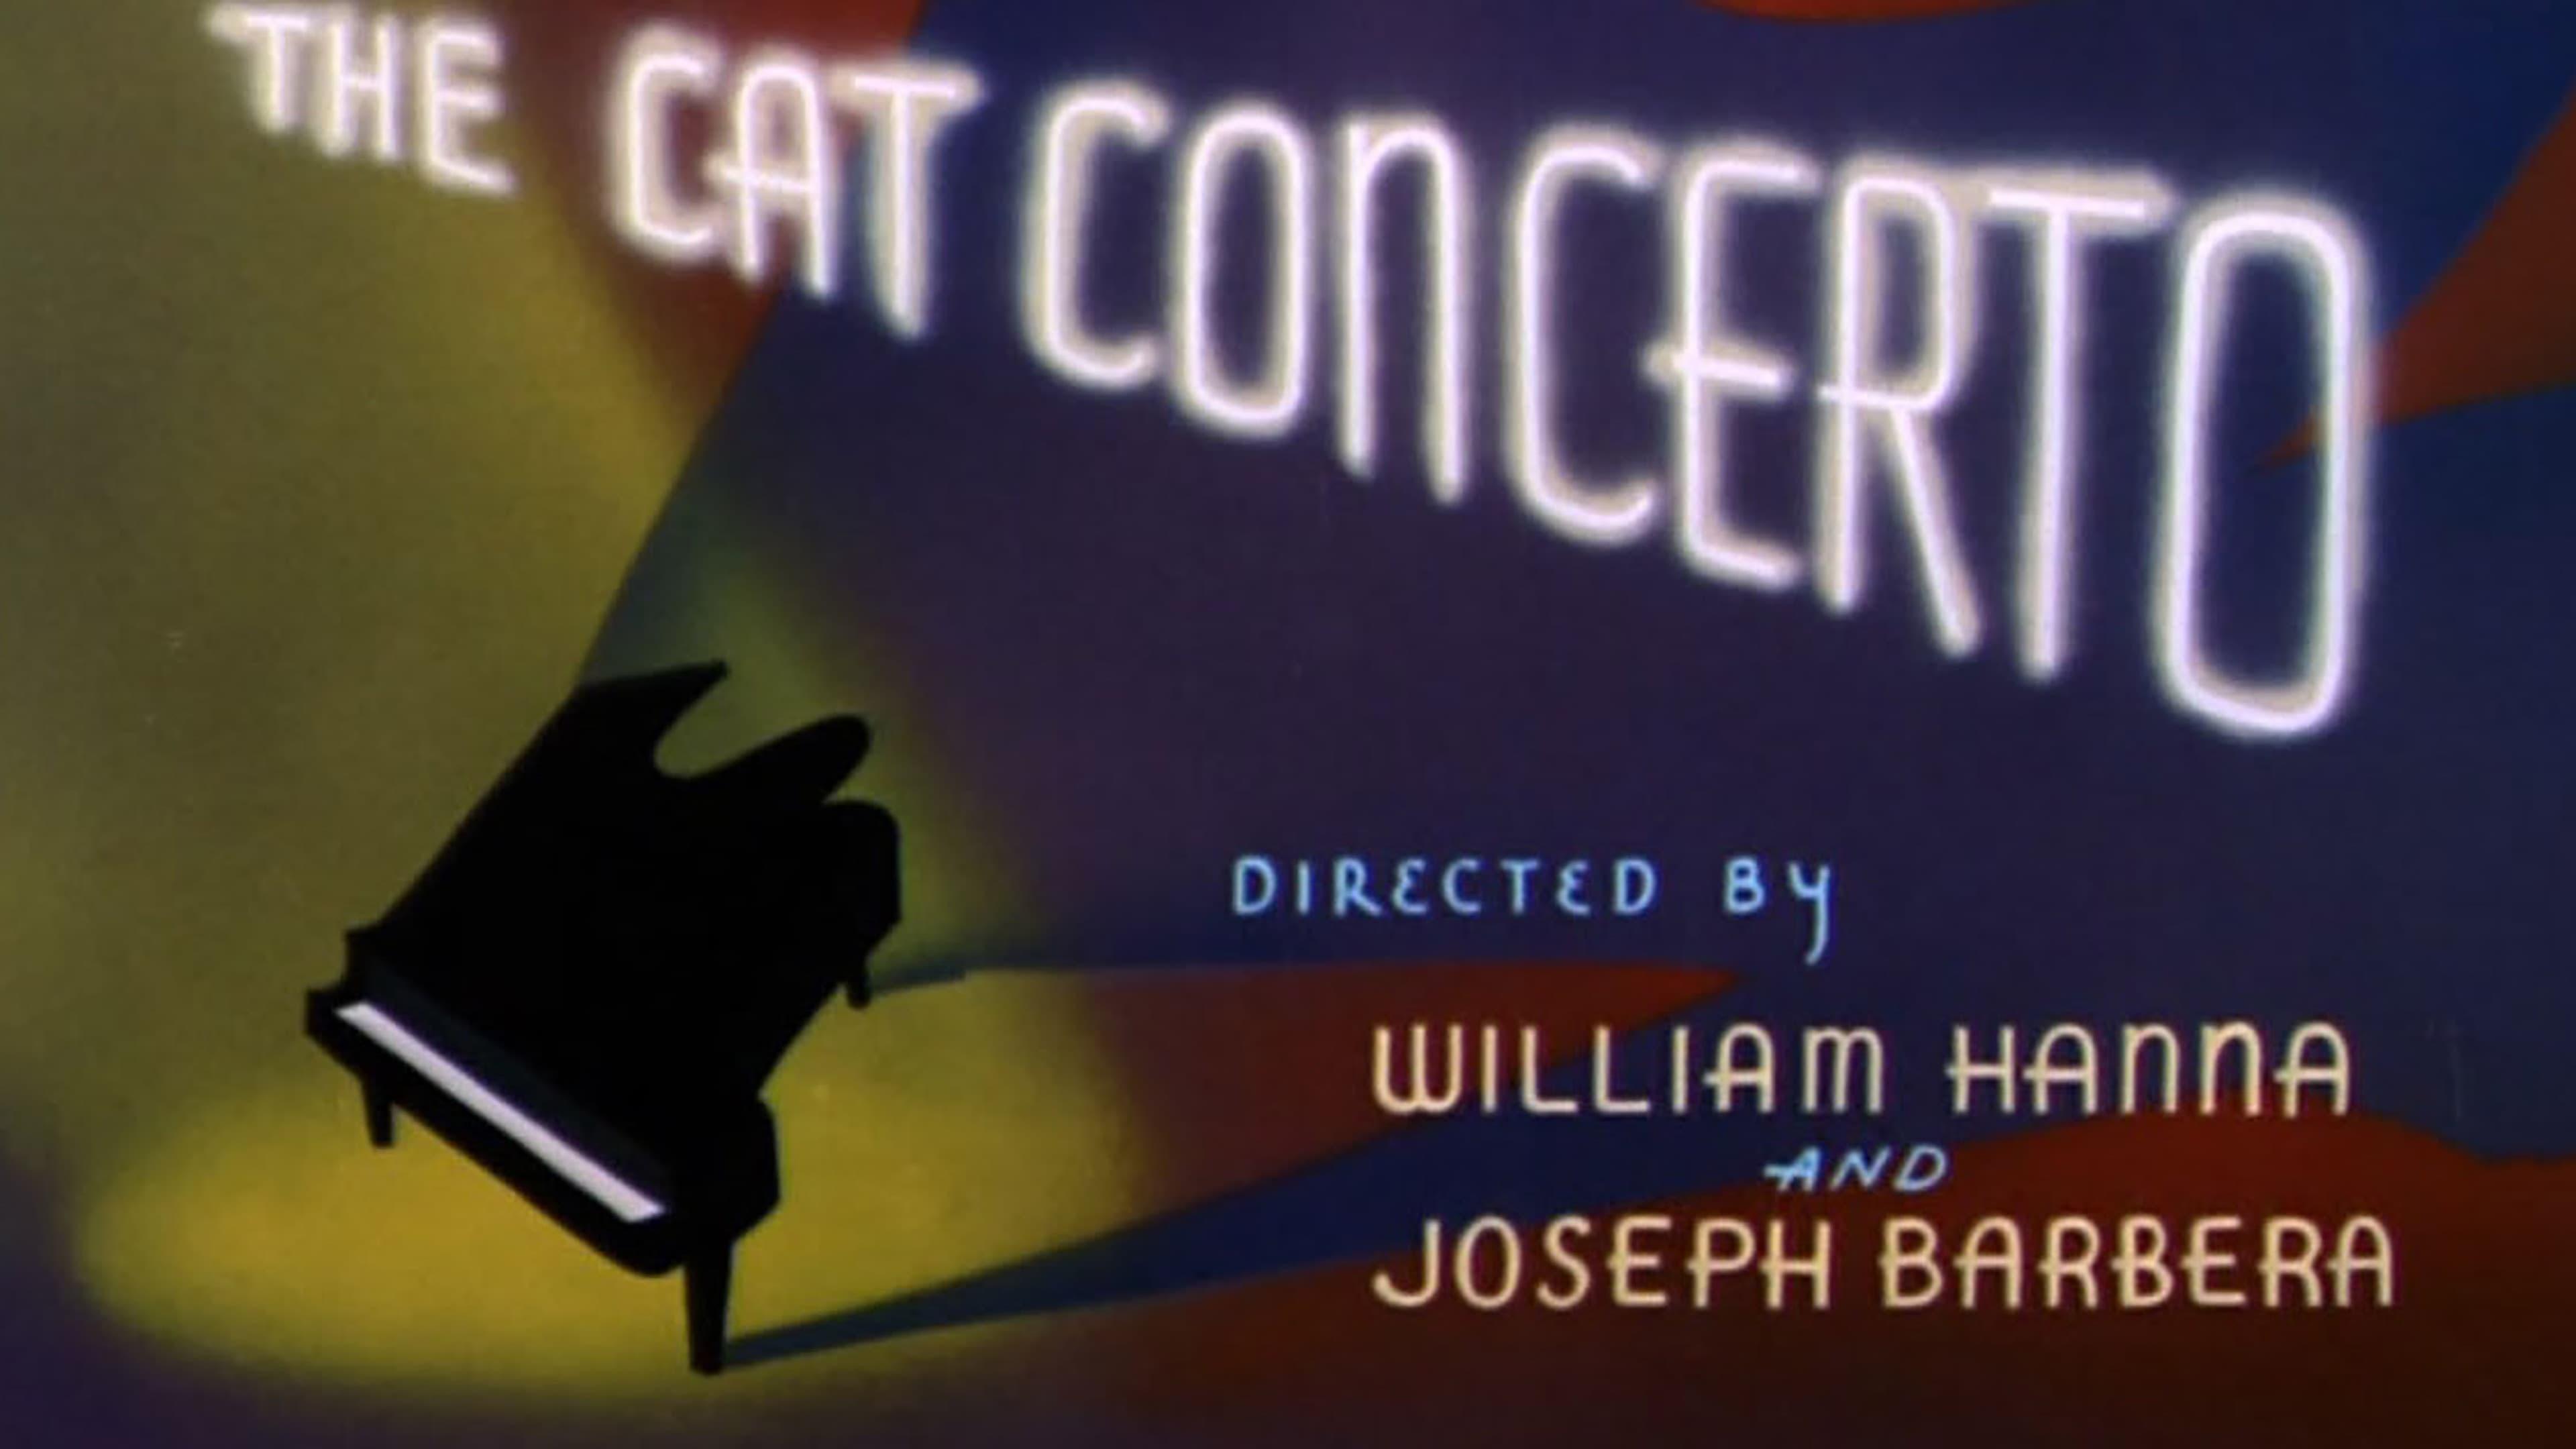 The Cat Concerto backdrop